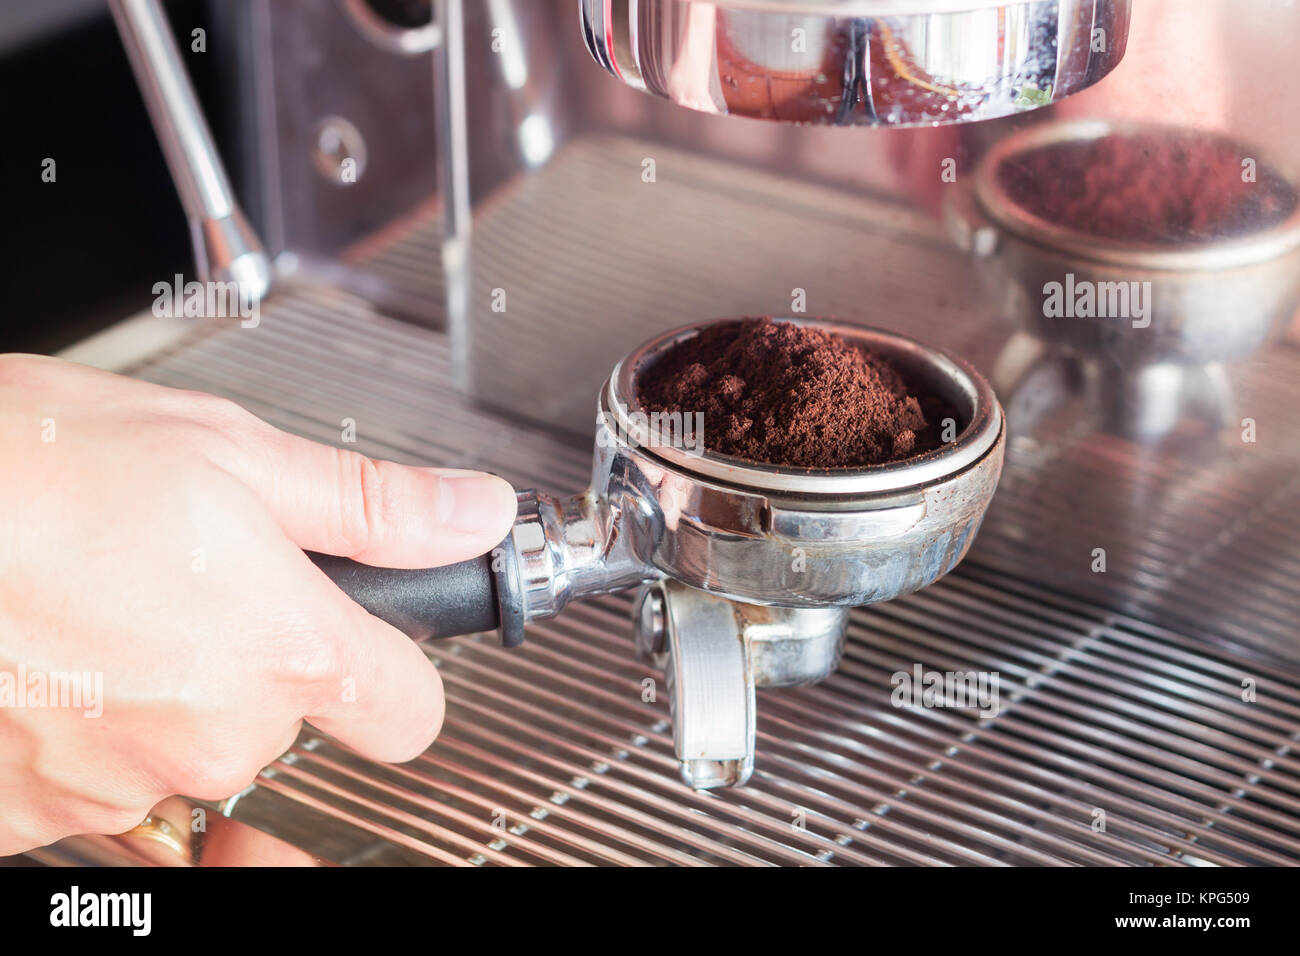 https://c8.alamy.com/comp/KPG509/womans-hand-holding-coffee-grind-in-group-with-vintage-style-KPG509.jpg